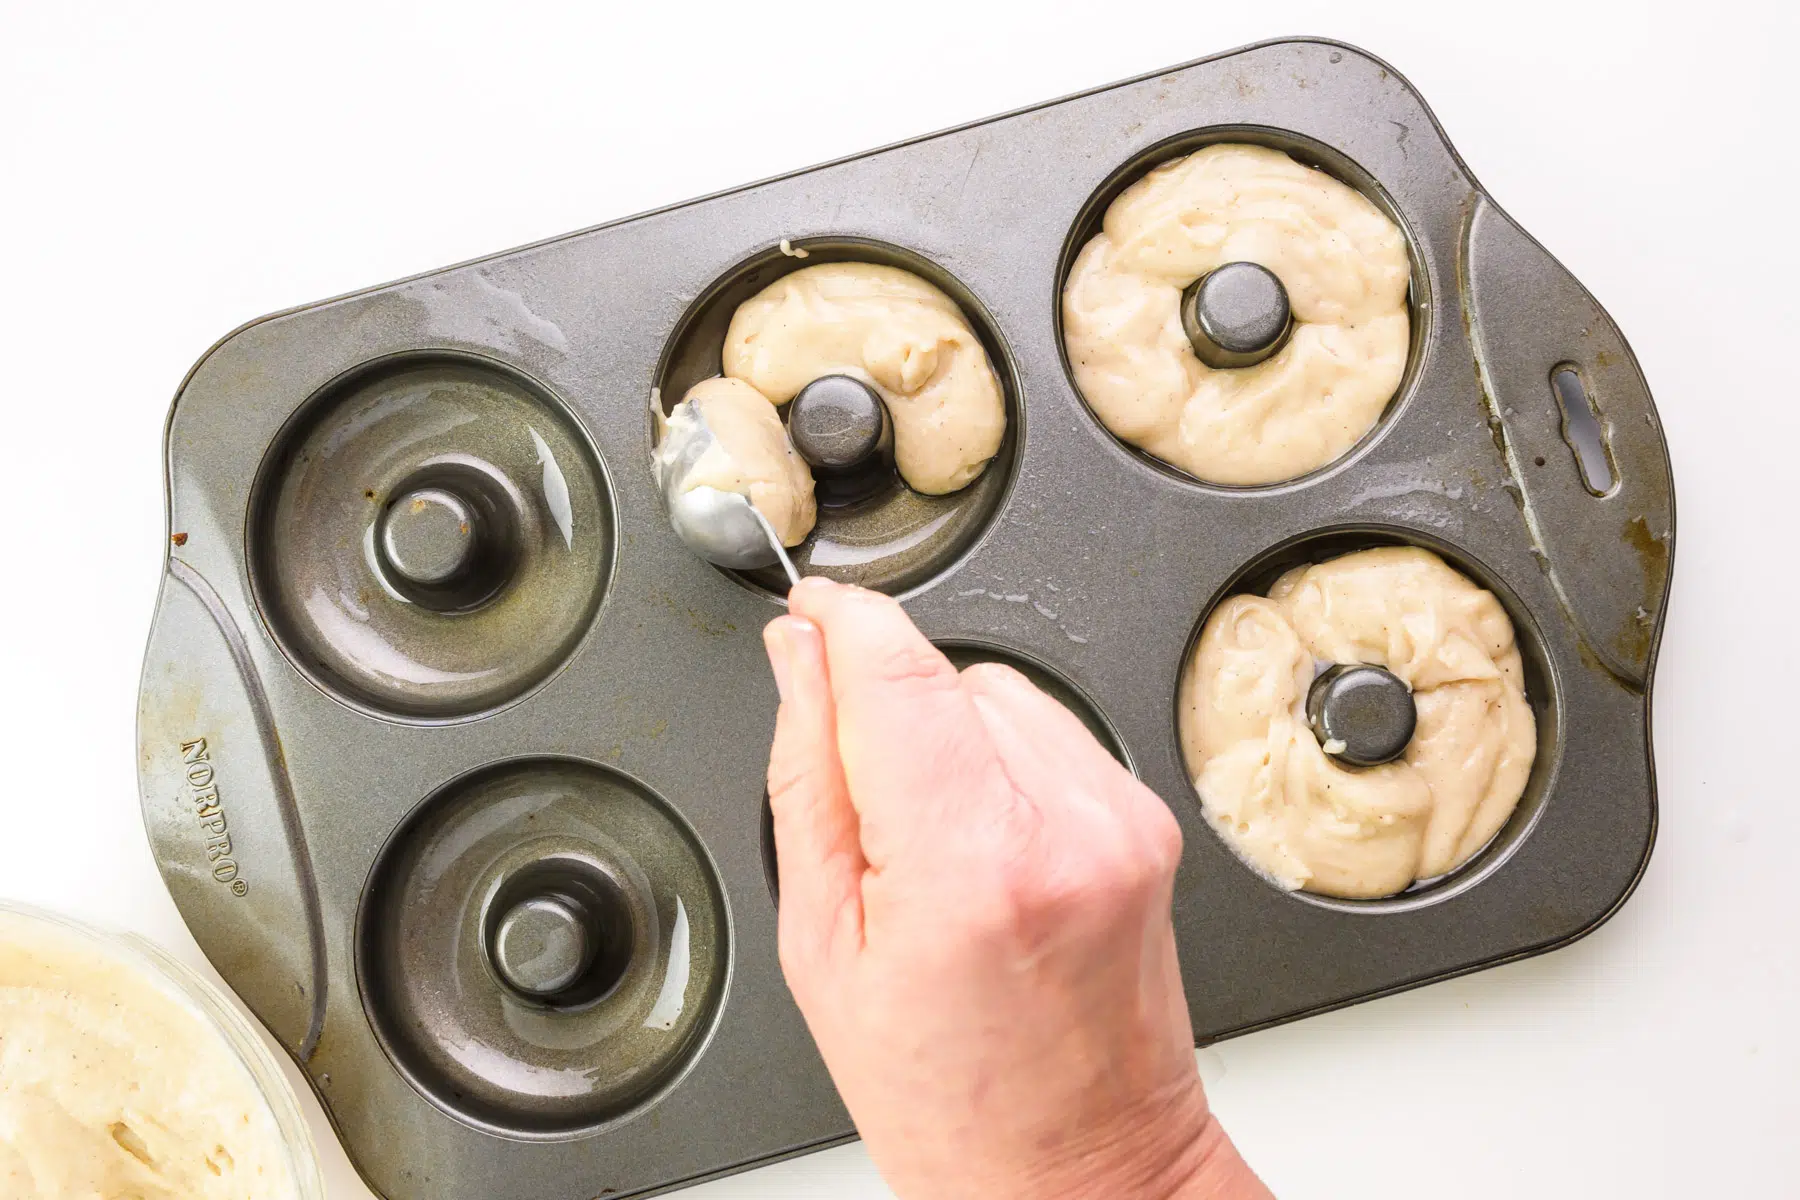 A hand holds a spoon, dispensing batter into greased donut compartments of a baking pan.